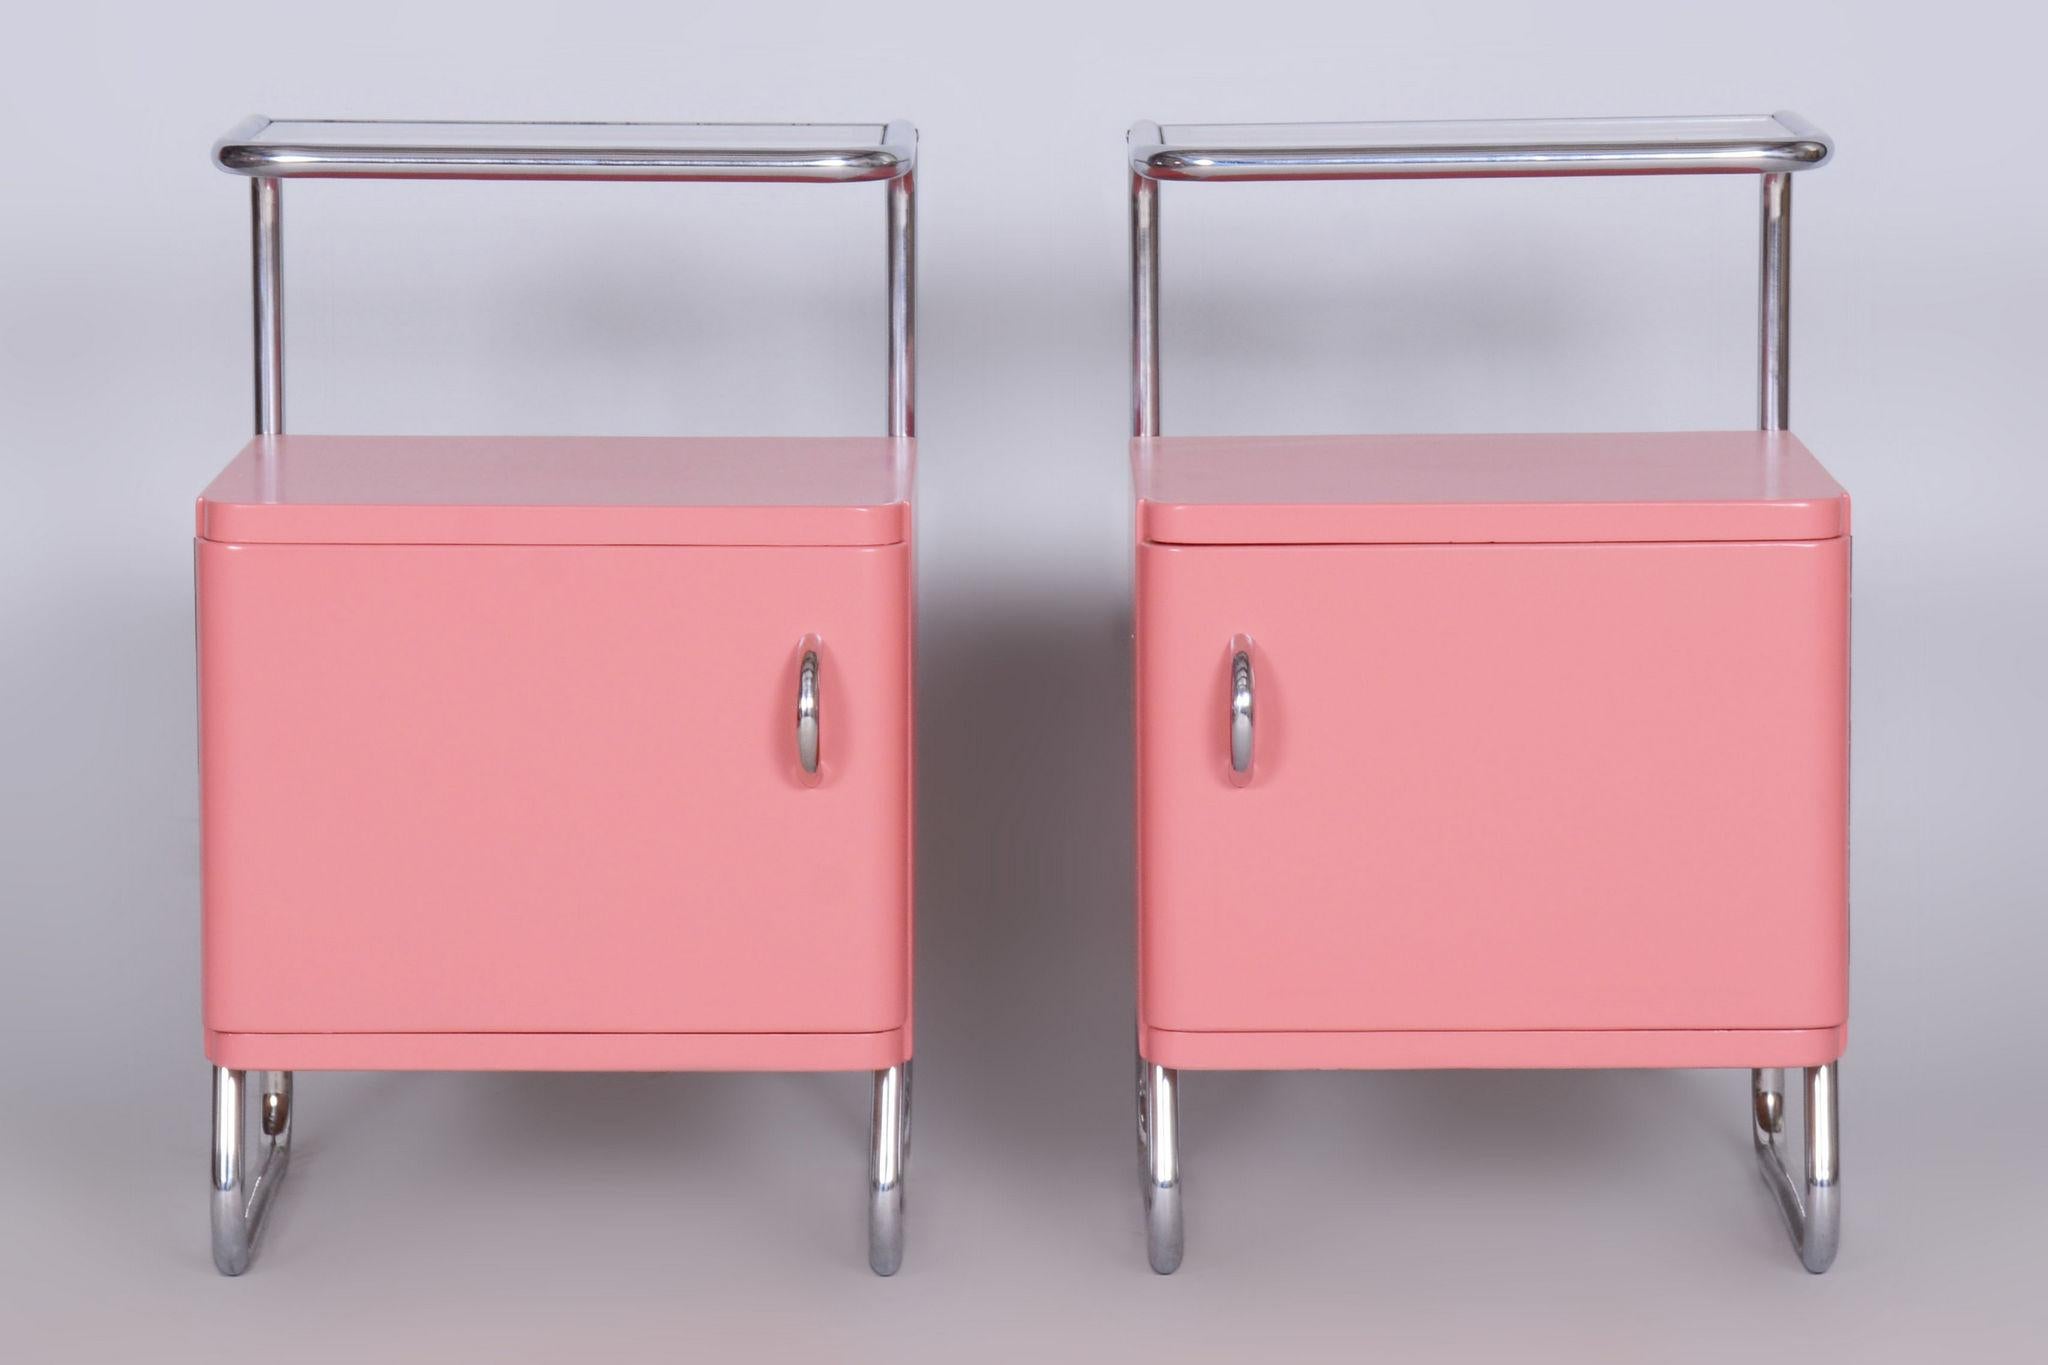 Restored Bauhaus Pair of Bed-Side Tables, Chrome-Plated Steel, Czechia, 1940s For Sale 1